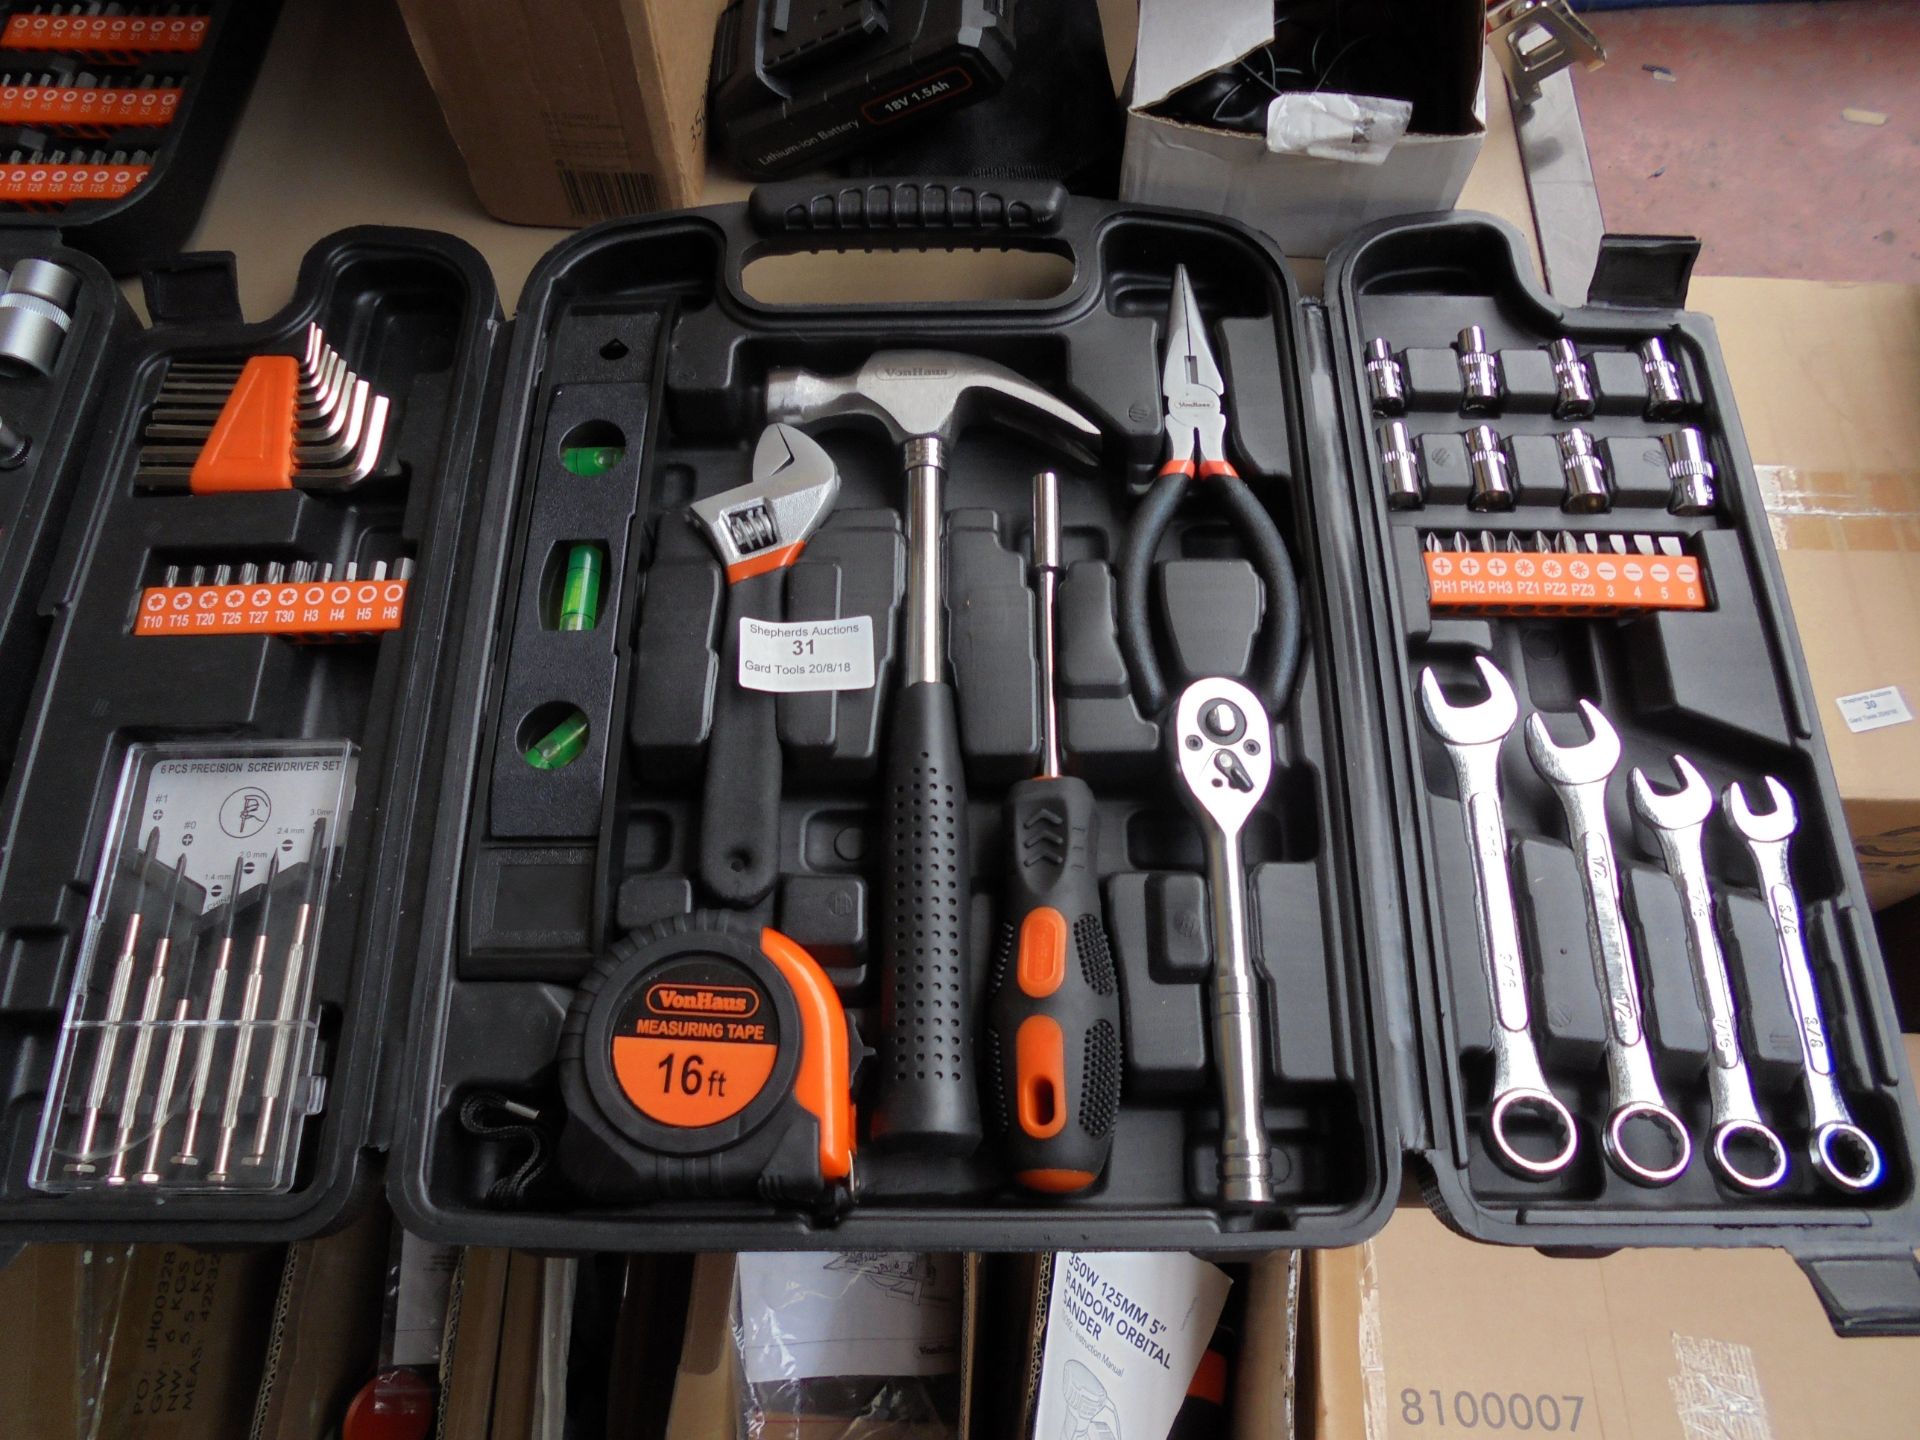 Tool piece set in carry case Please note by Bidding on this item you agree to the following terms